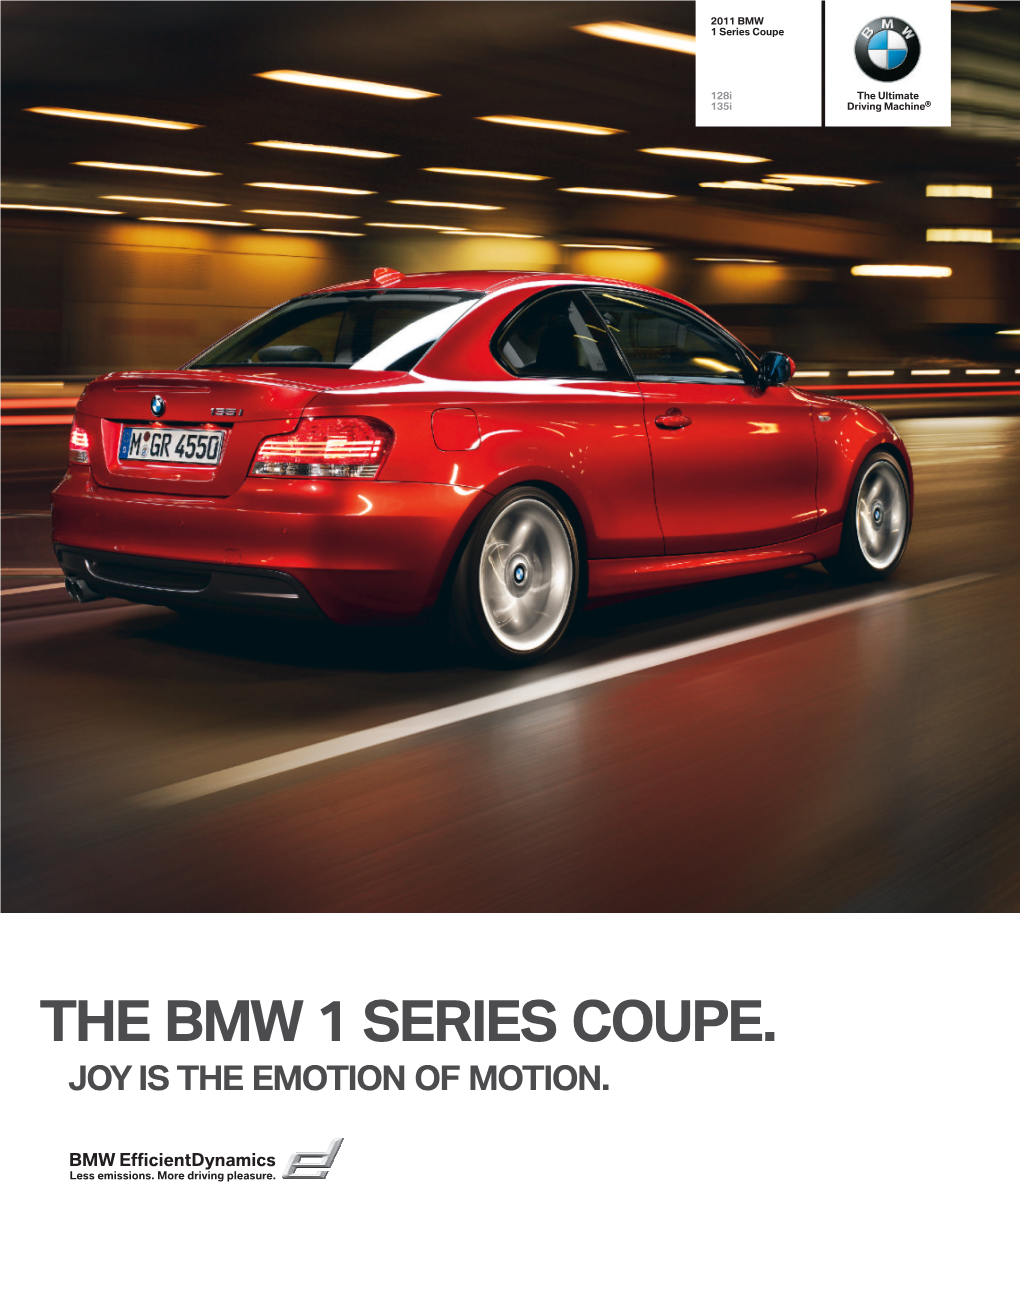 The Bmw 1 Series Coupe. Joy Is the Emotion of Motion